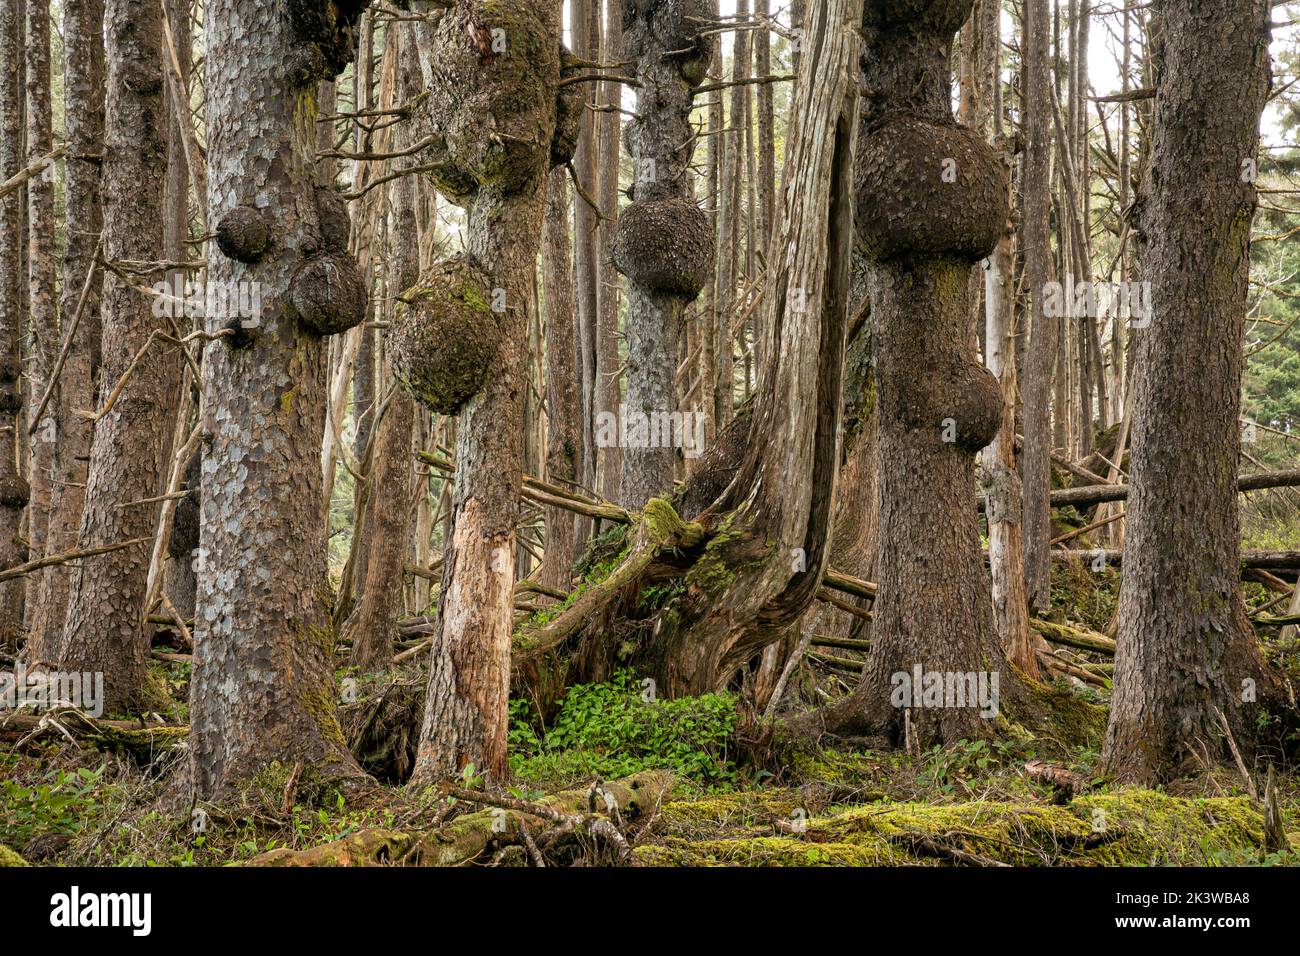 WA22081-00...WASHINGTON - Spruce trees with burls growing along the edge of the coast in Olympic National Park. Stock Photo